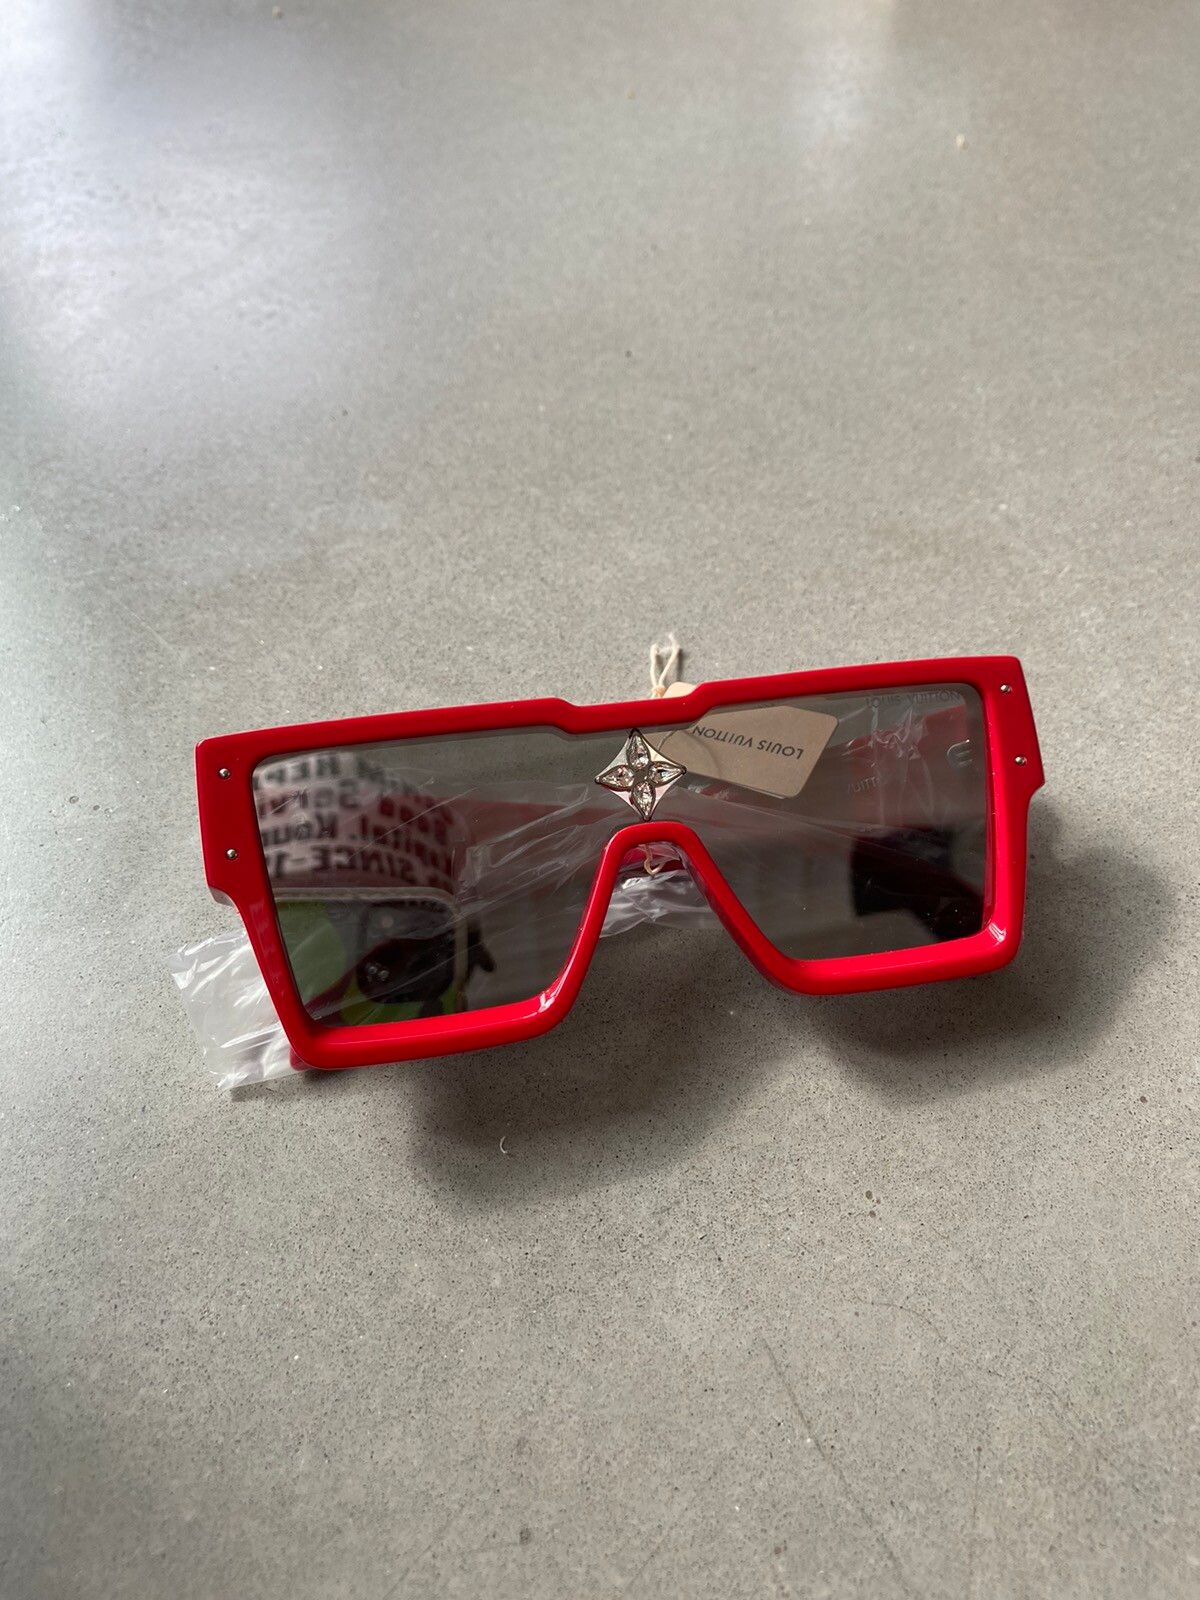 Louis Vuitton Rare NYC Exclusive Red Cyclone Sunglasses